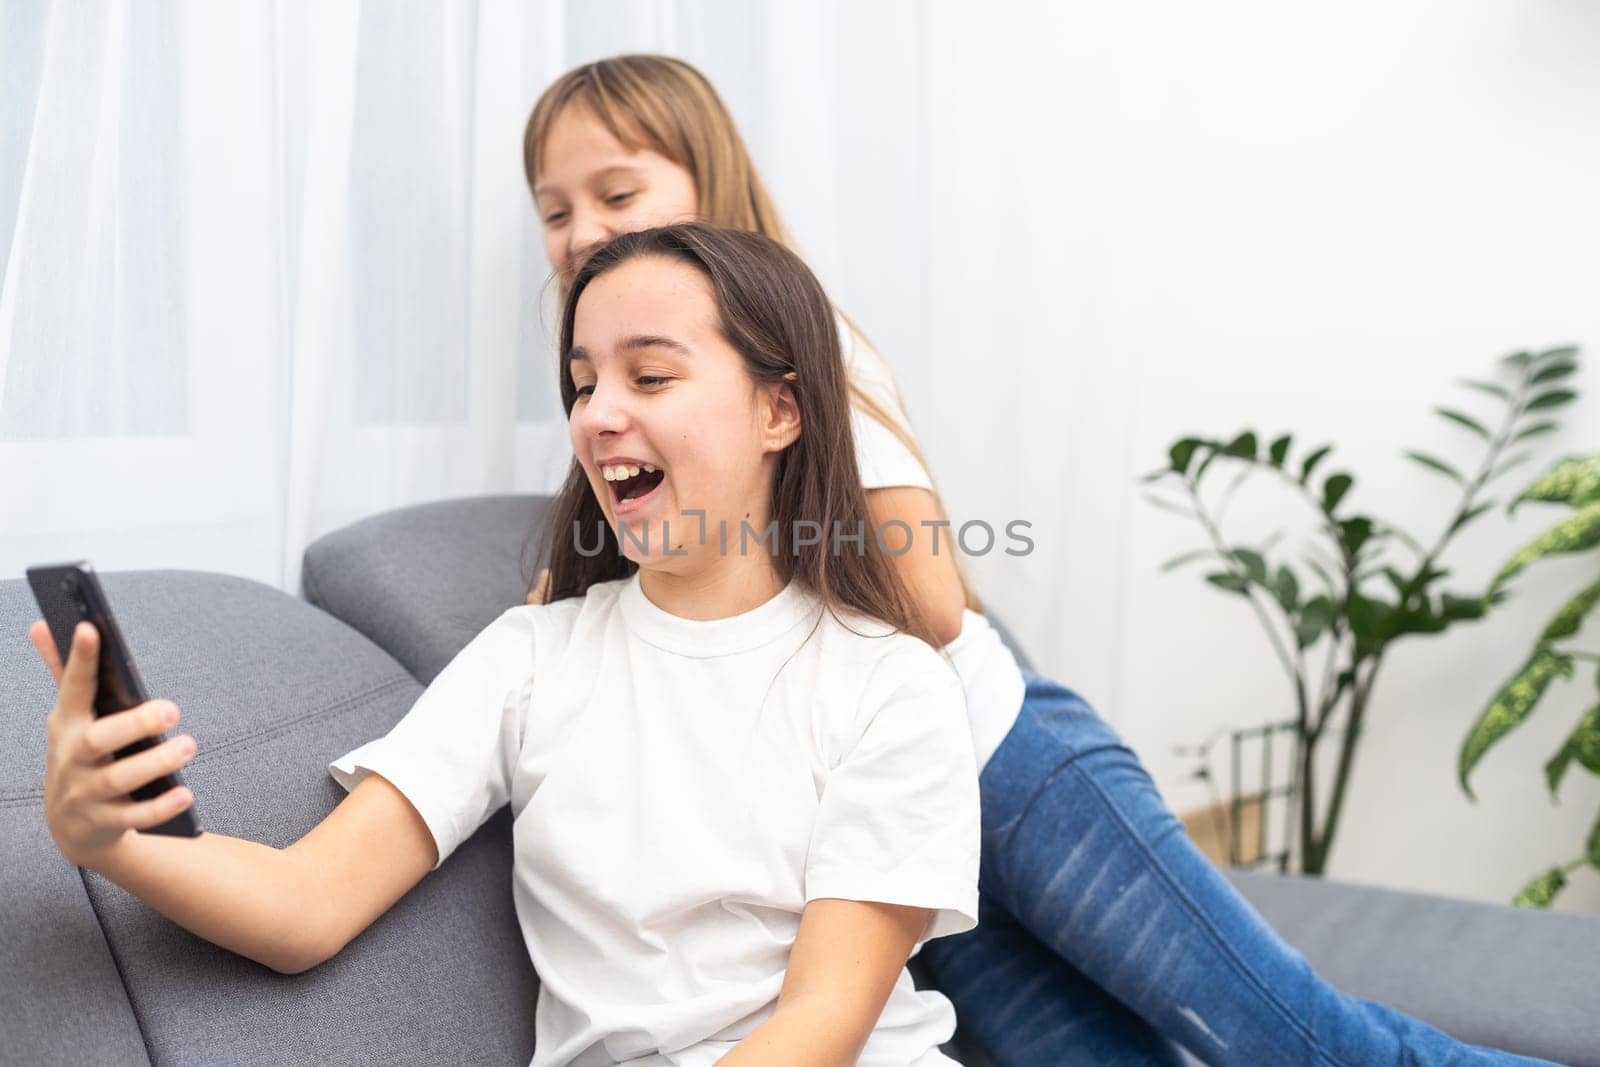 Child with smartphone at home. Two kids using smart phone, surfing internet or using social media. Two kids using online mobile phone, call, watching content, playing video games, sitting on couch. High quality photo